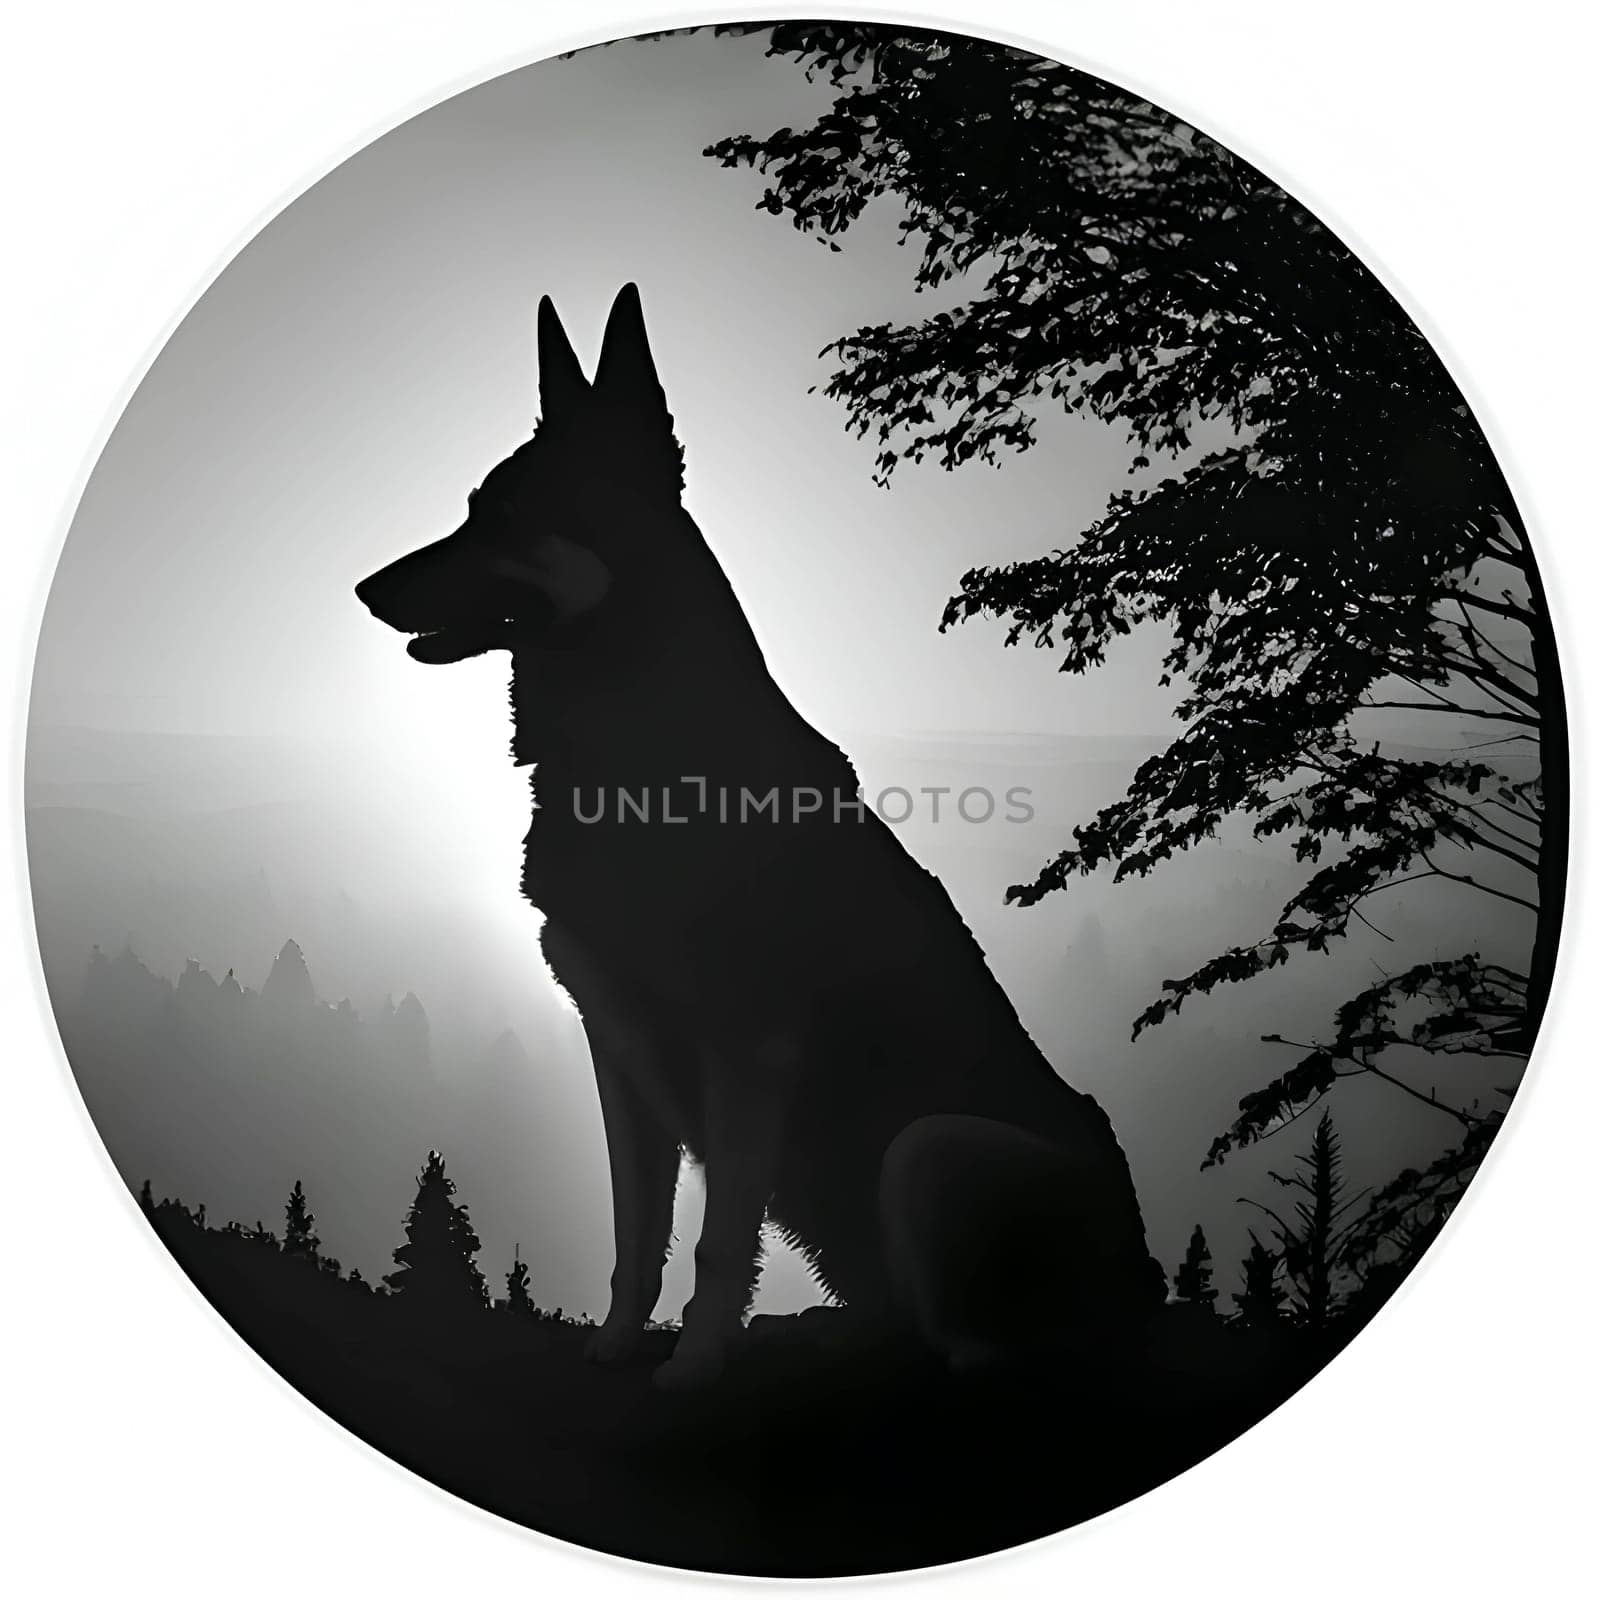 Vector illustration of a dog in circle in black silhouette against a clean white background, capturing graceful forms.